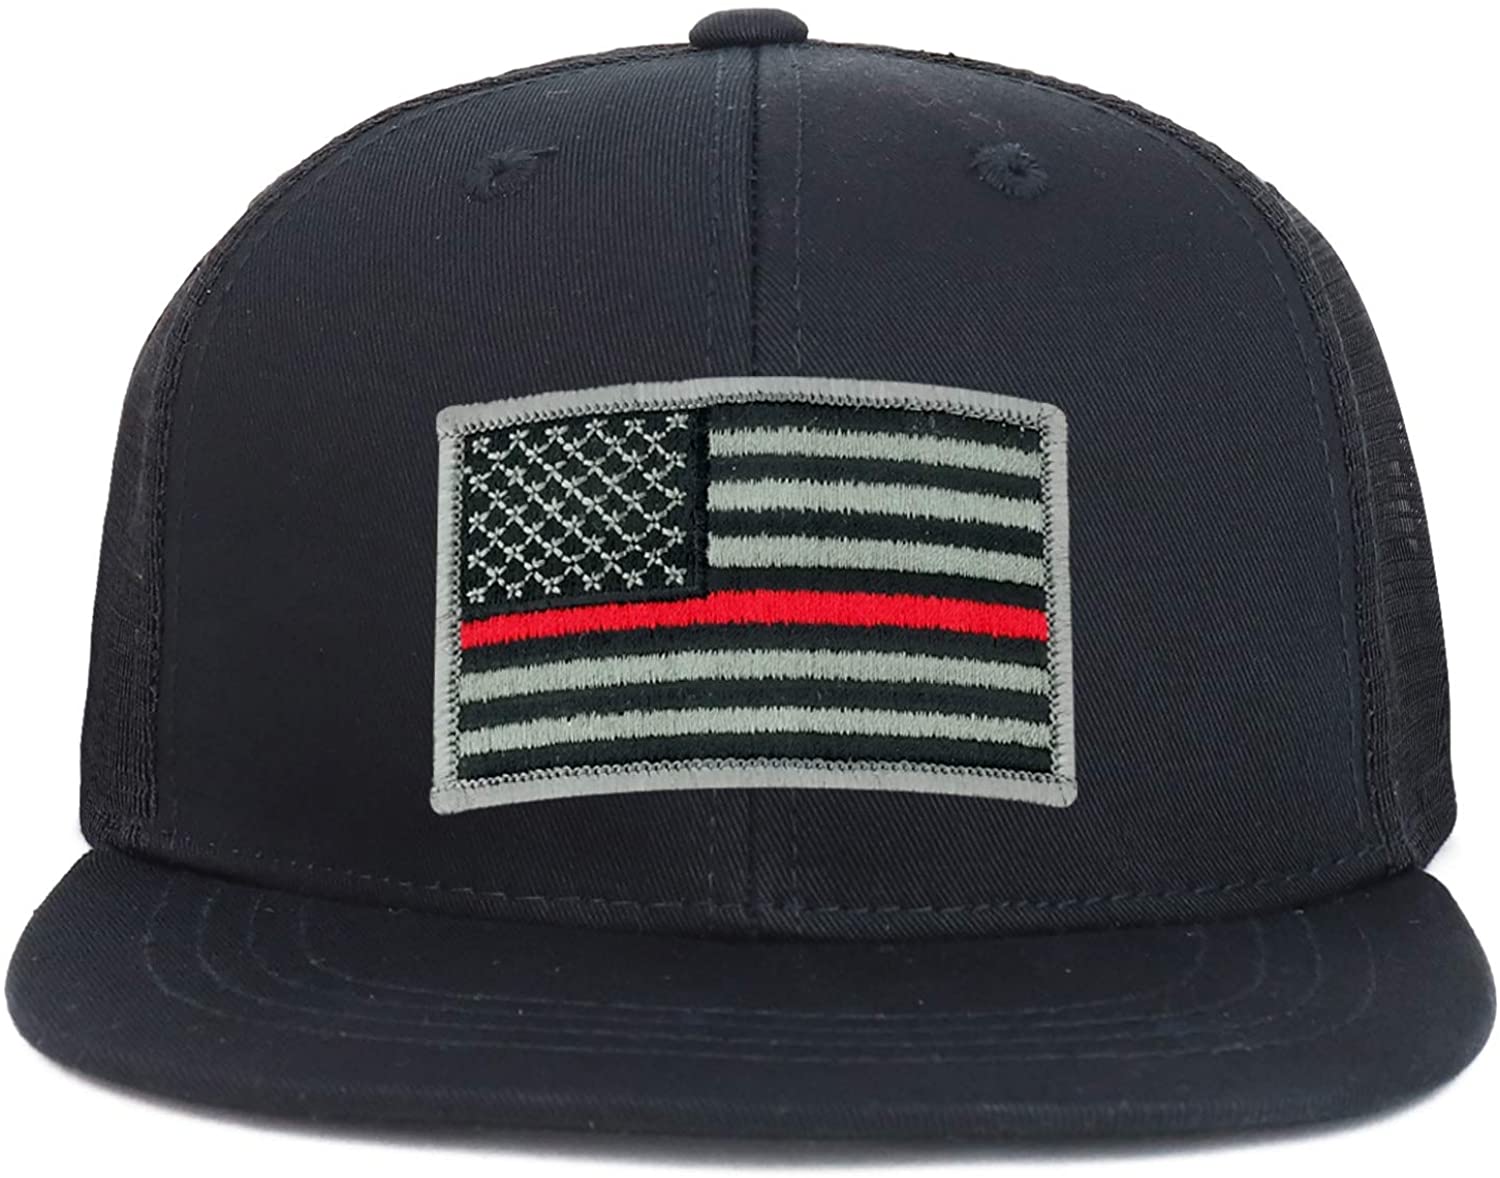 Armycrew Youth Kid's Thin Red Line American Flag Patch Flat Bill Snapback Trucker Cap